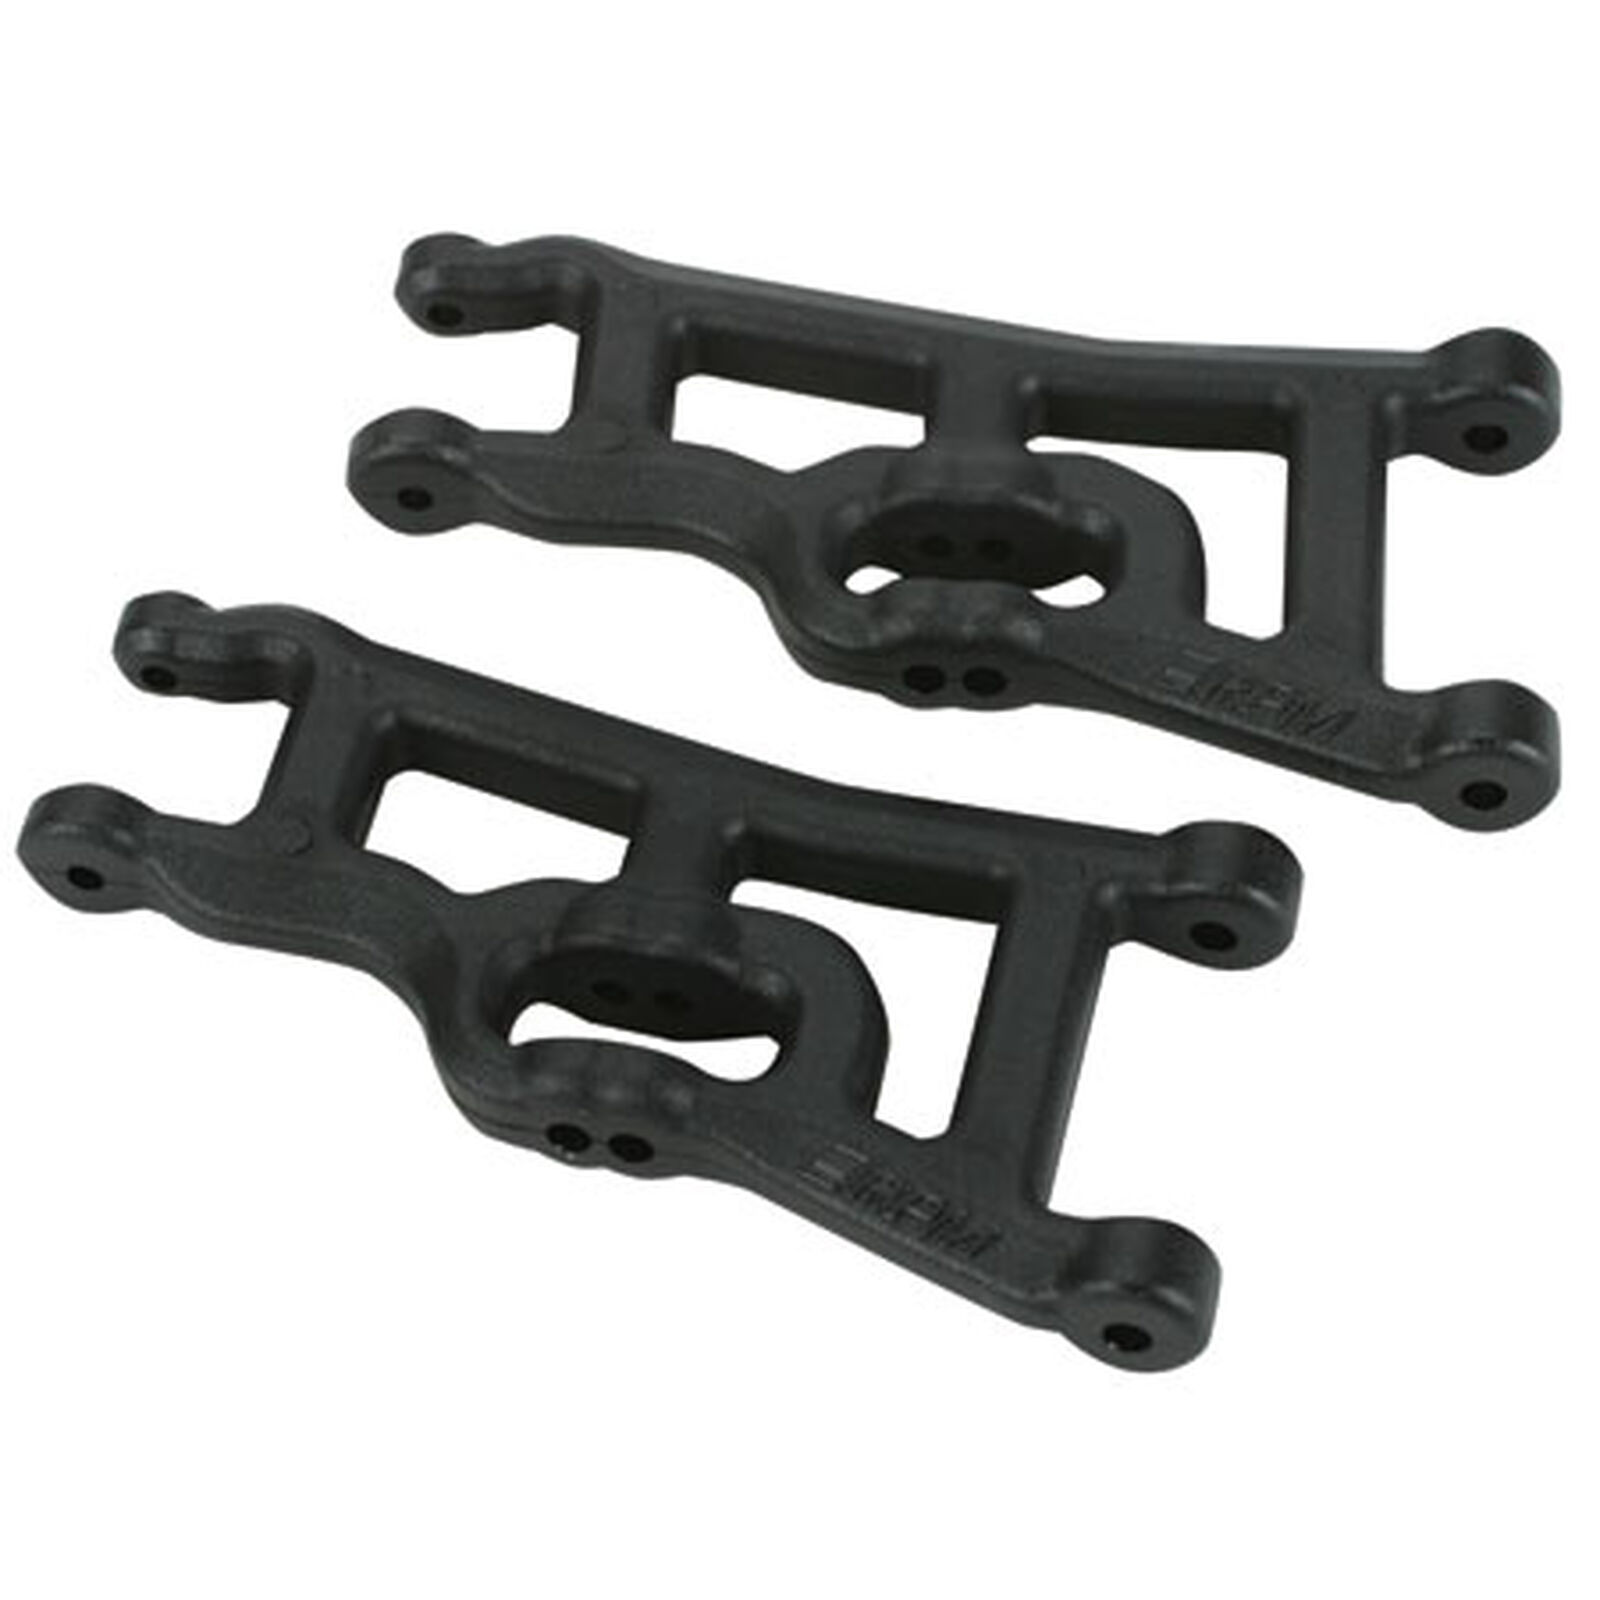 Front A-arms (2), Black: RU, ST, SLH